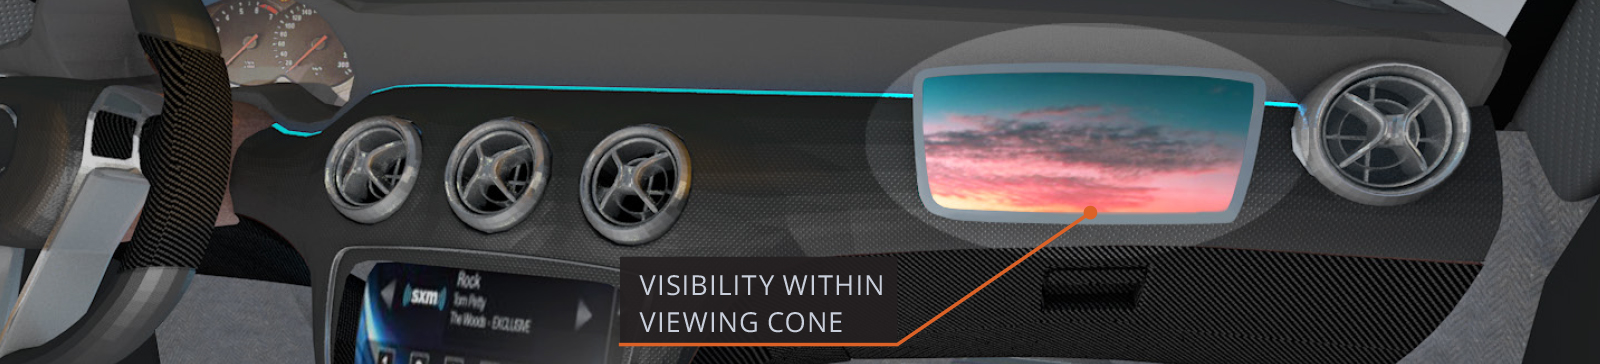 Visibility Within Viewing Cone